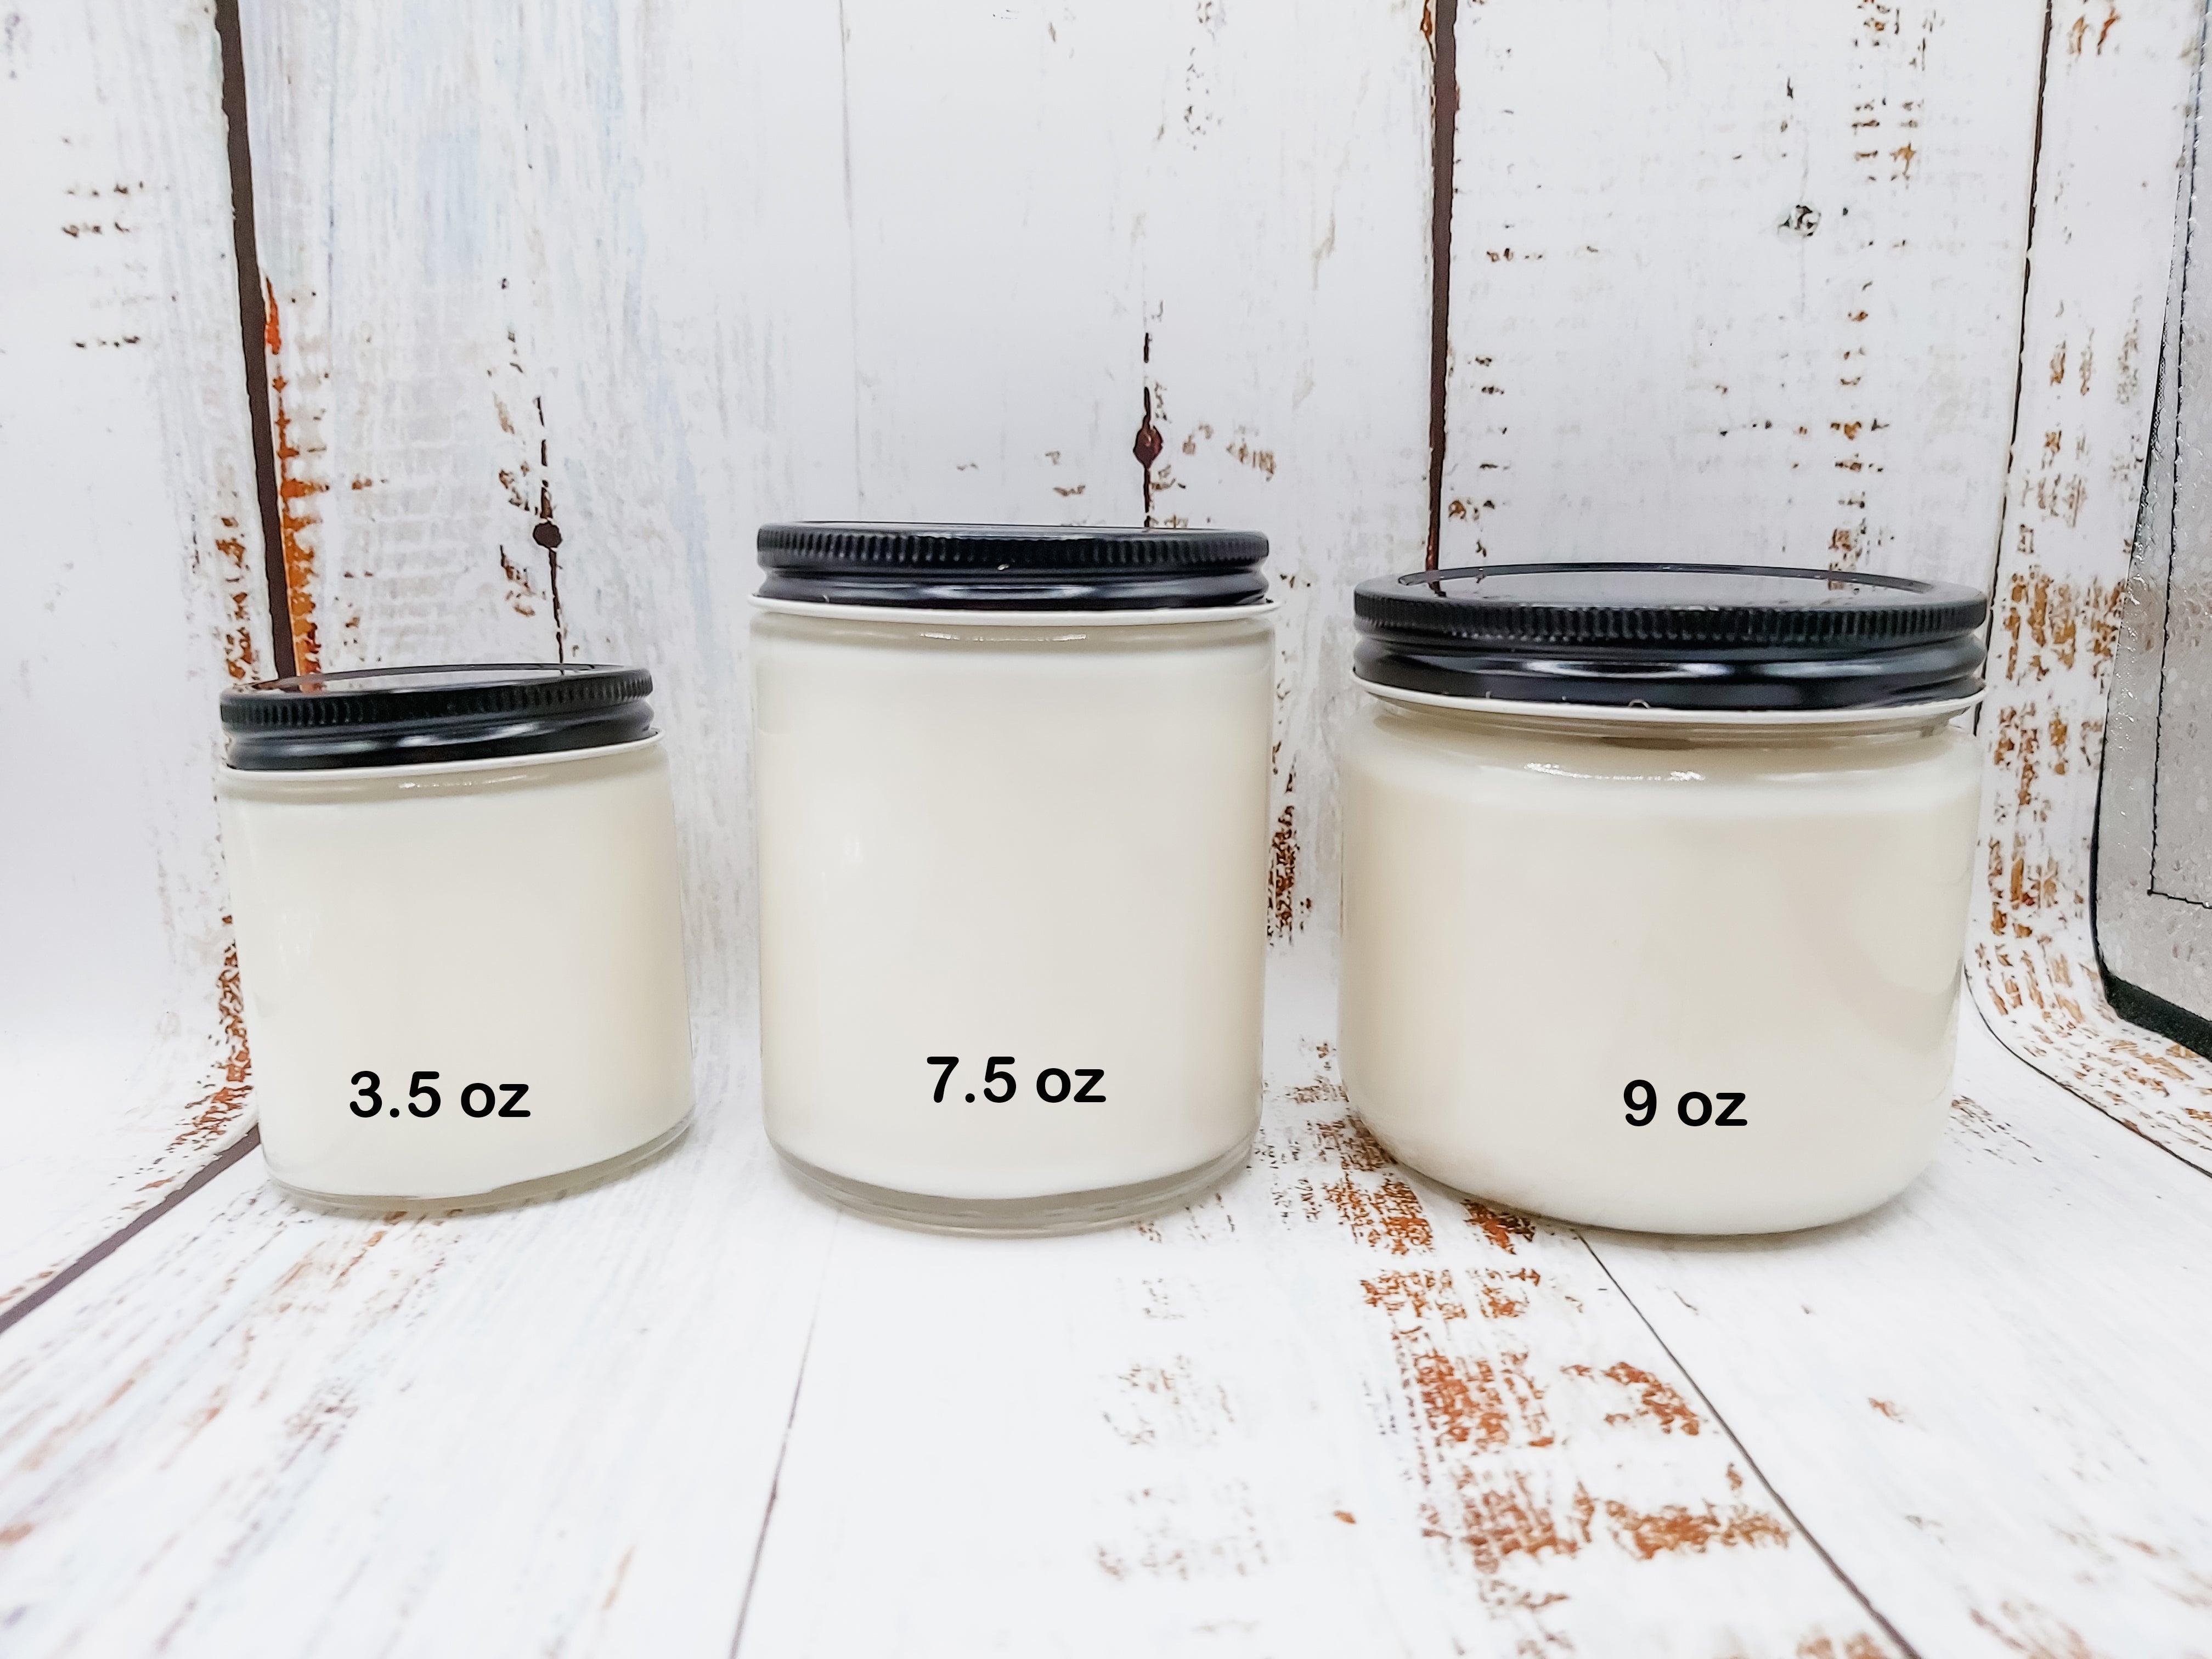 Brewhouse - Scented Soy Candle